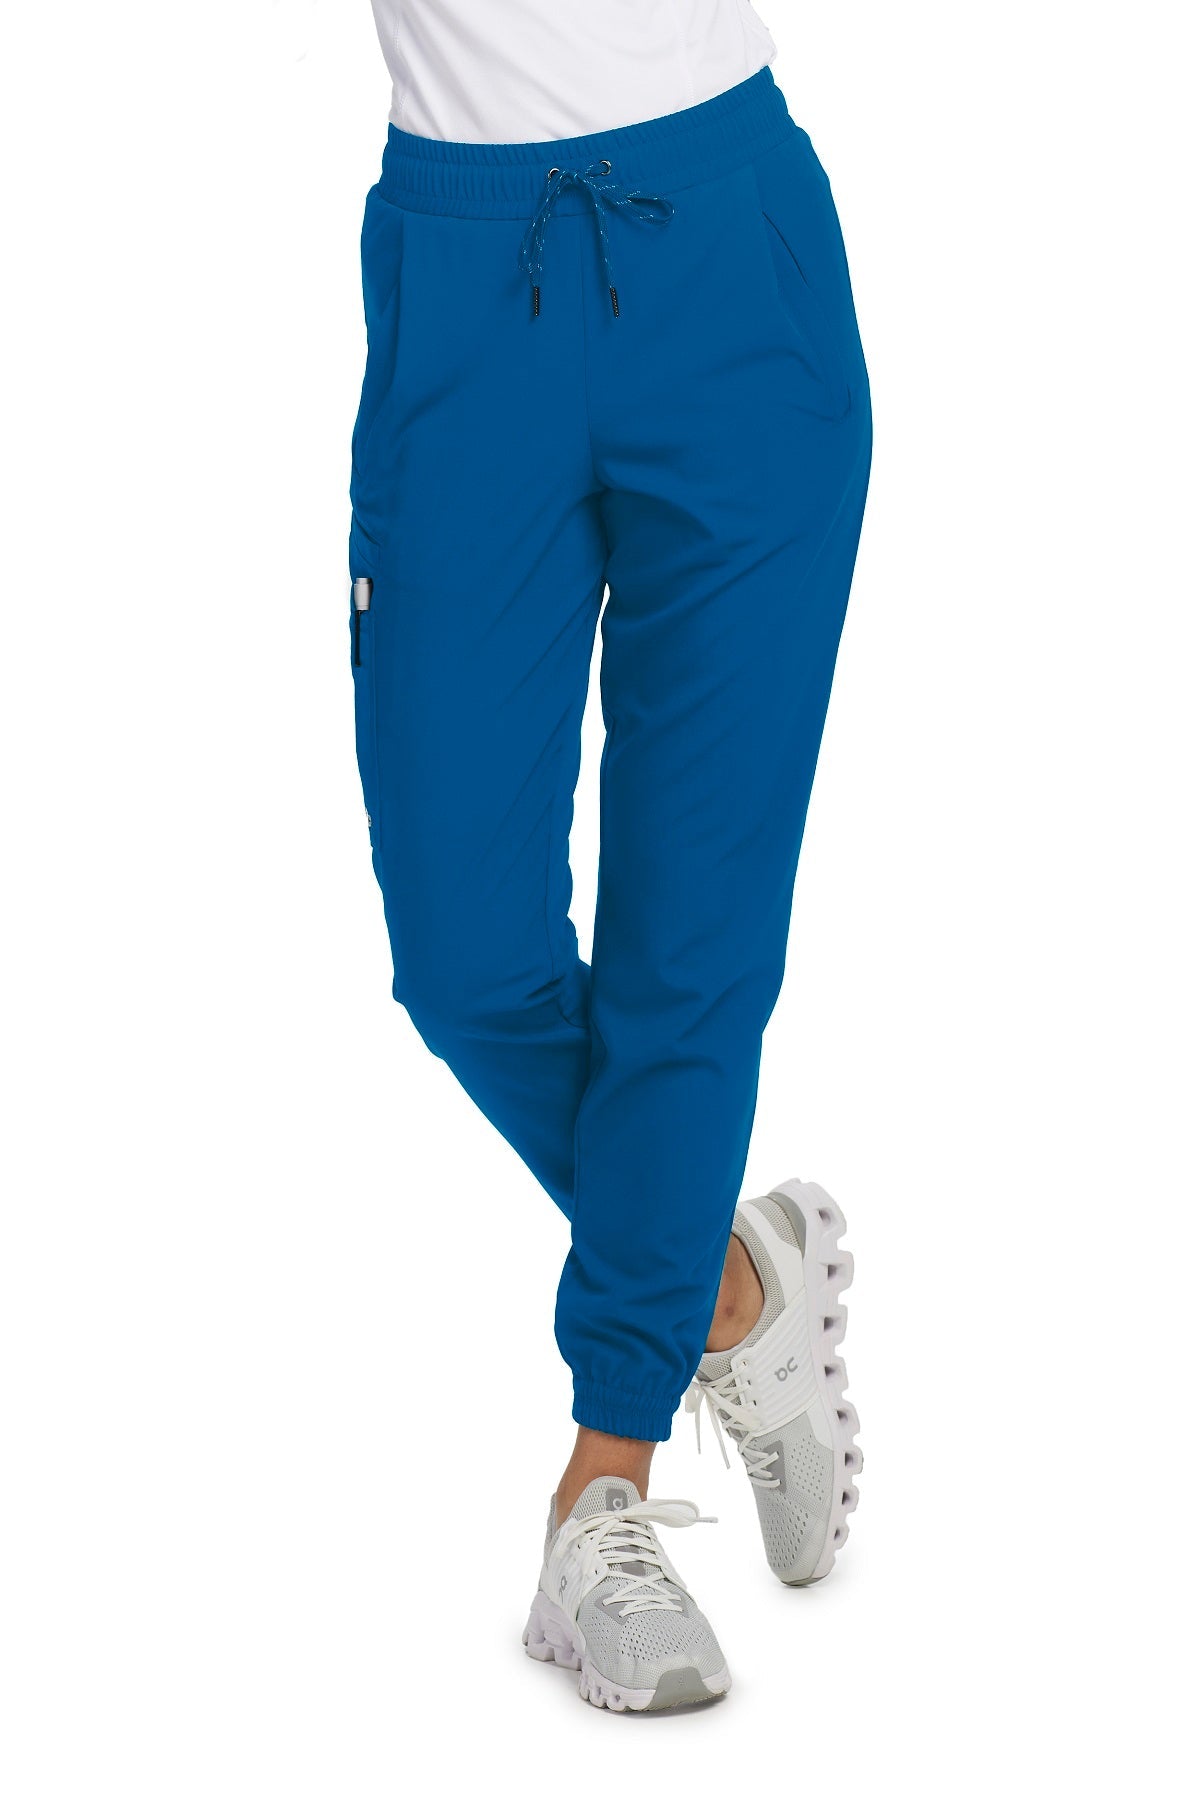 Barco Unify Scrub Pants Mission Jogger Petite Length in New Royal at Parker's Clothing and Shoes.